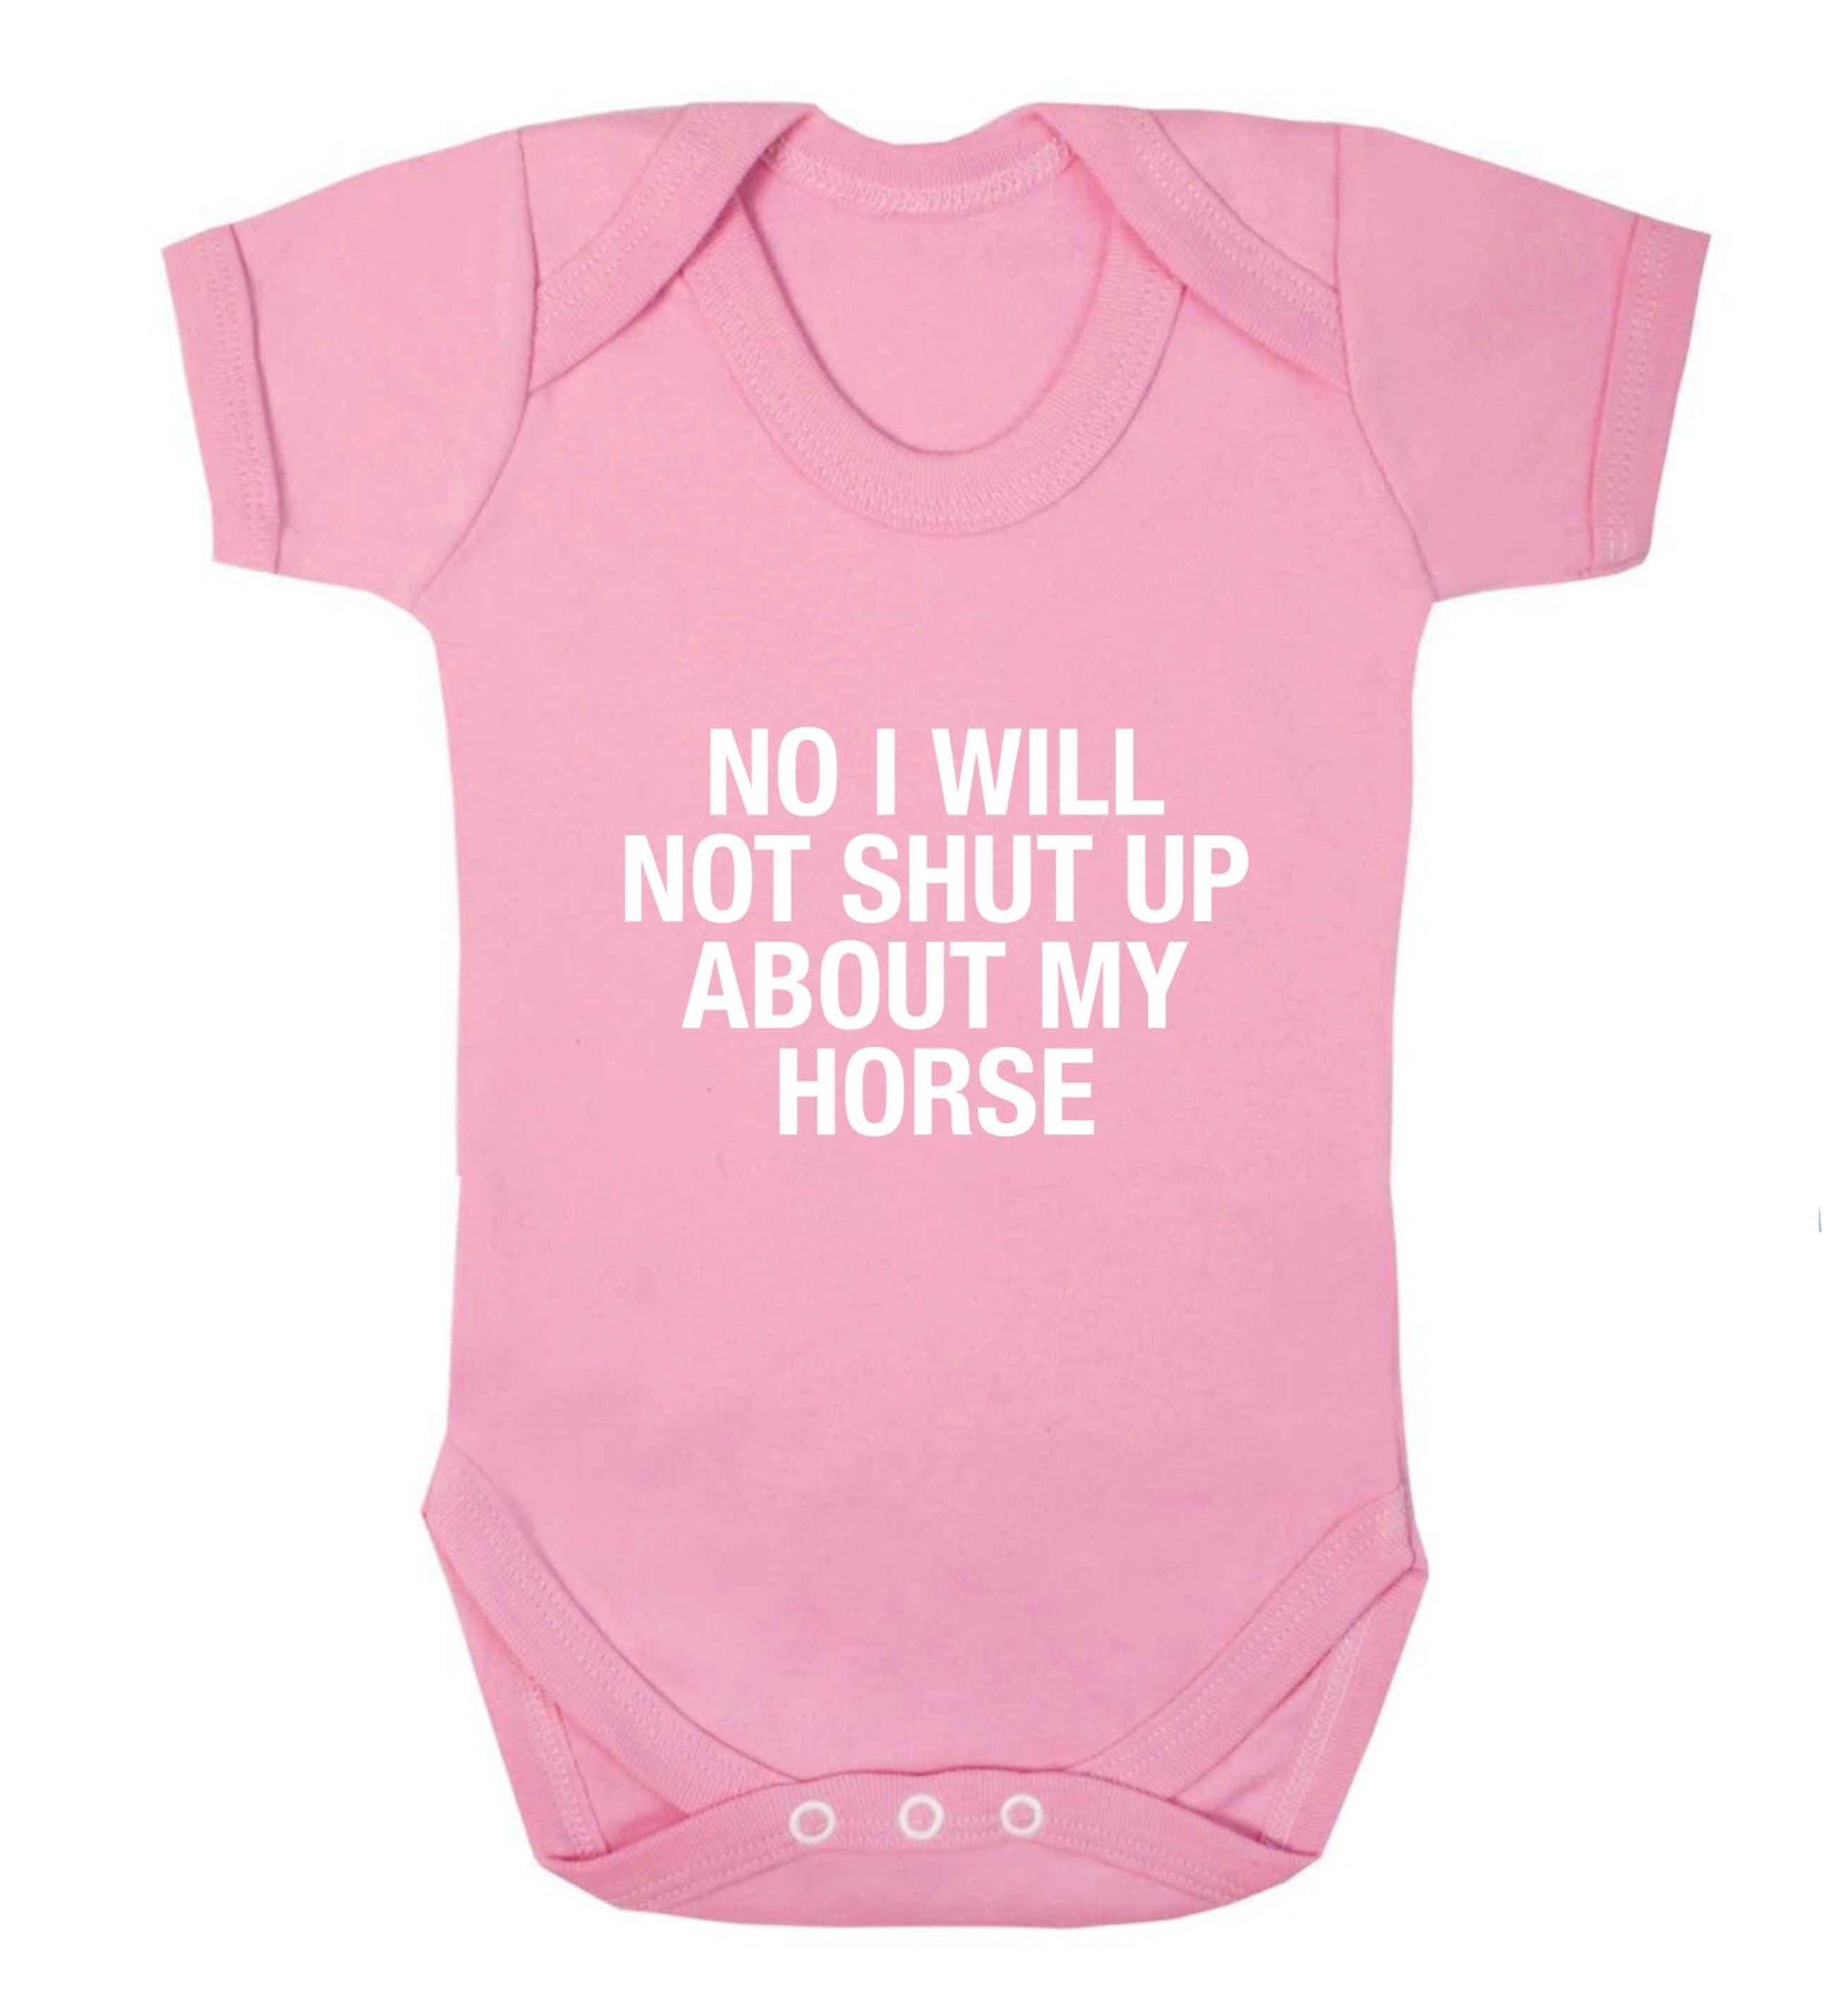 No I will not shut up talking about my horse baby vest pale pink 18-24 months